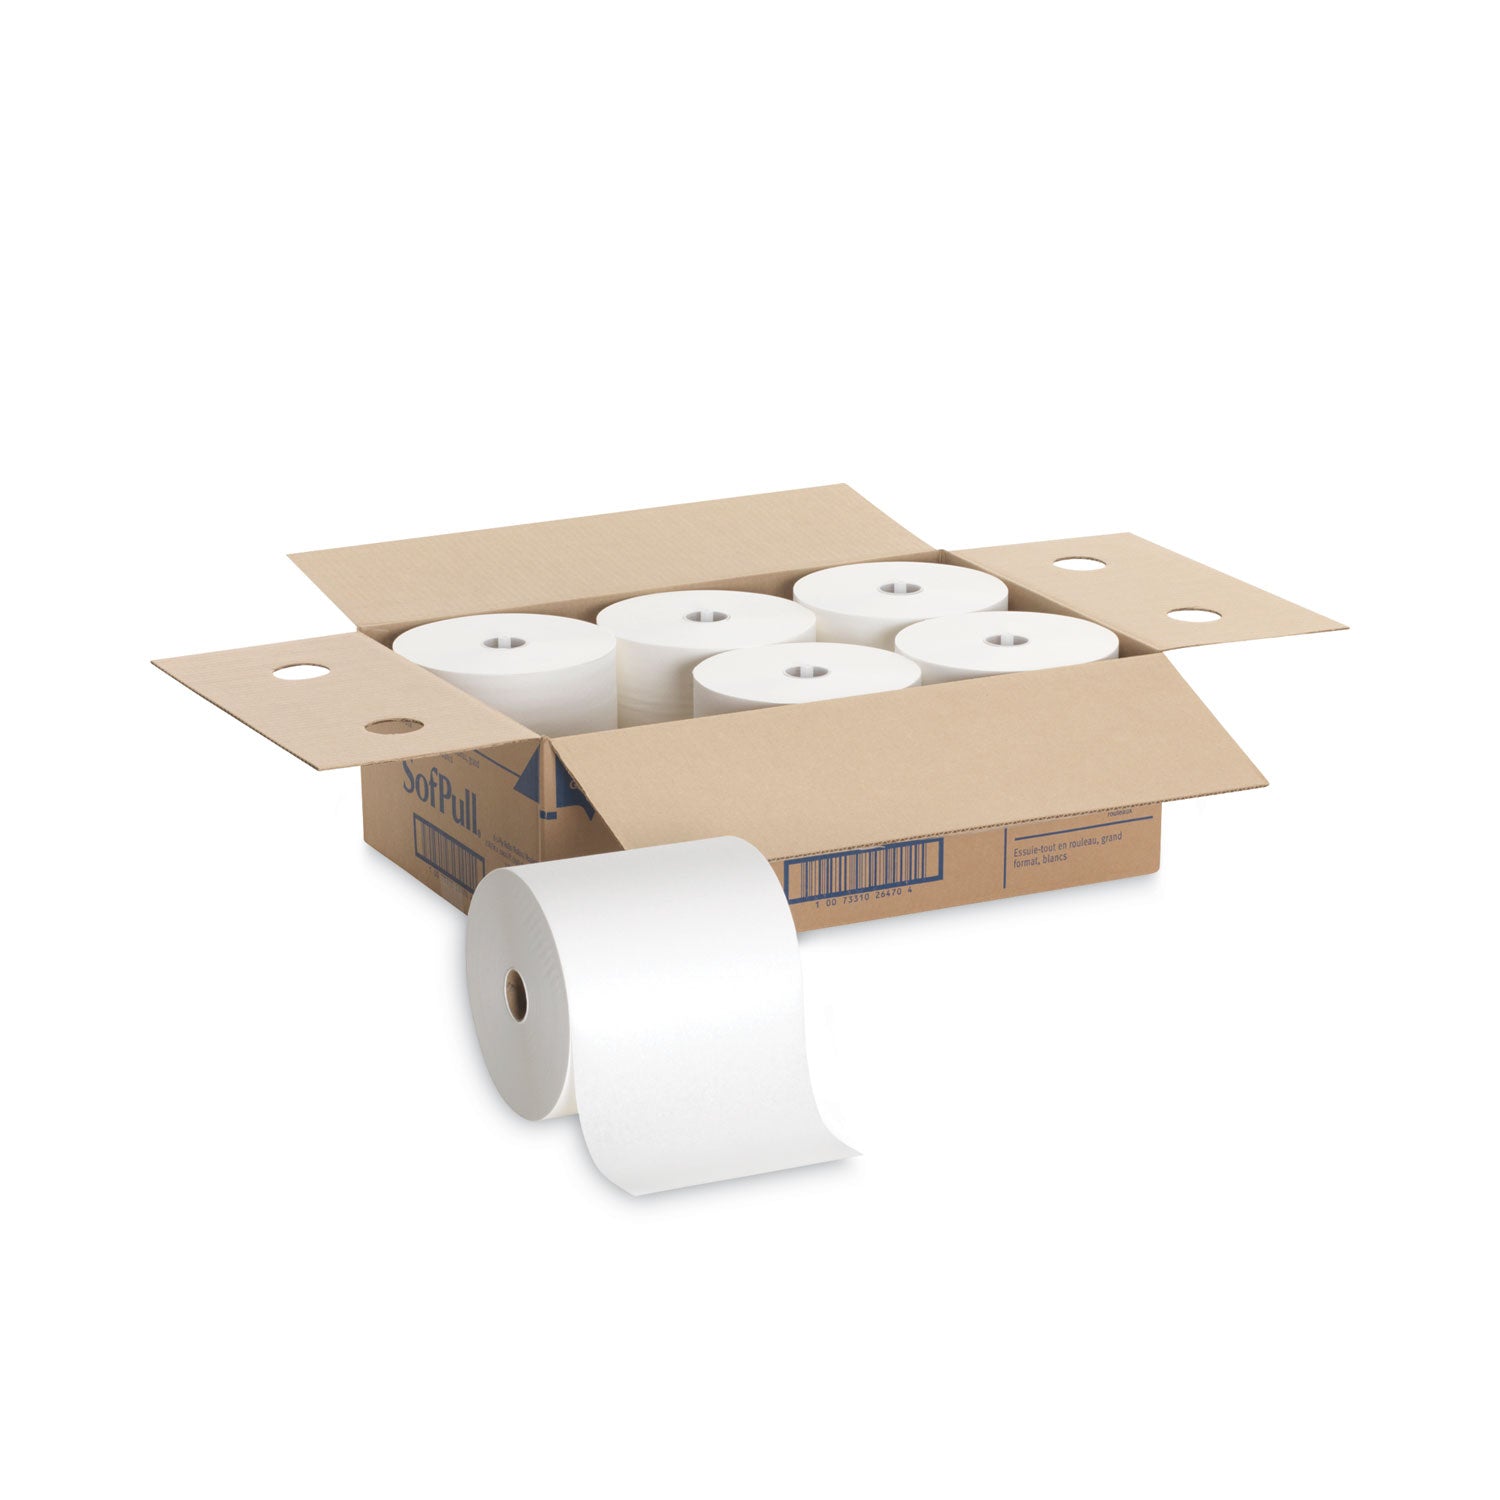 Hardwound Roll Paper Towel, Nonperforated, 1-Ply, 7.87" x 1,000 ft, White, 6 Rolls/Carton - 